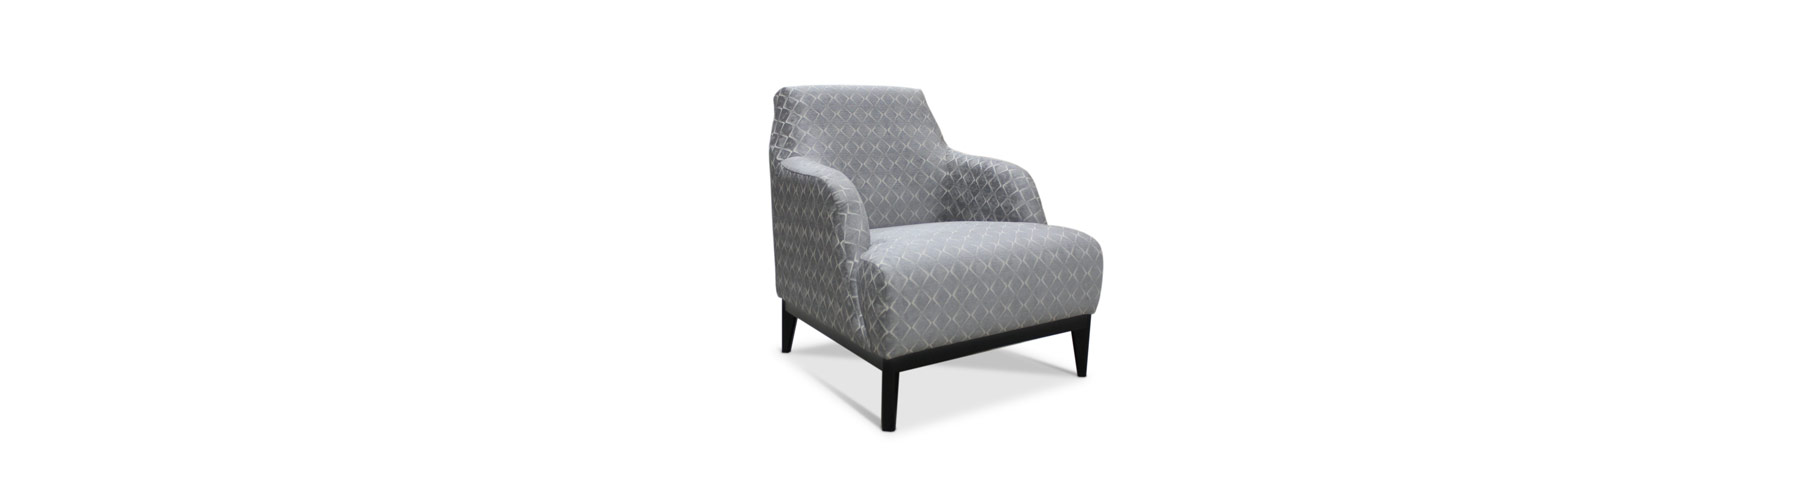 Lolly - Fauteuil William